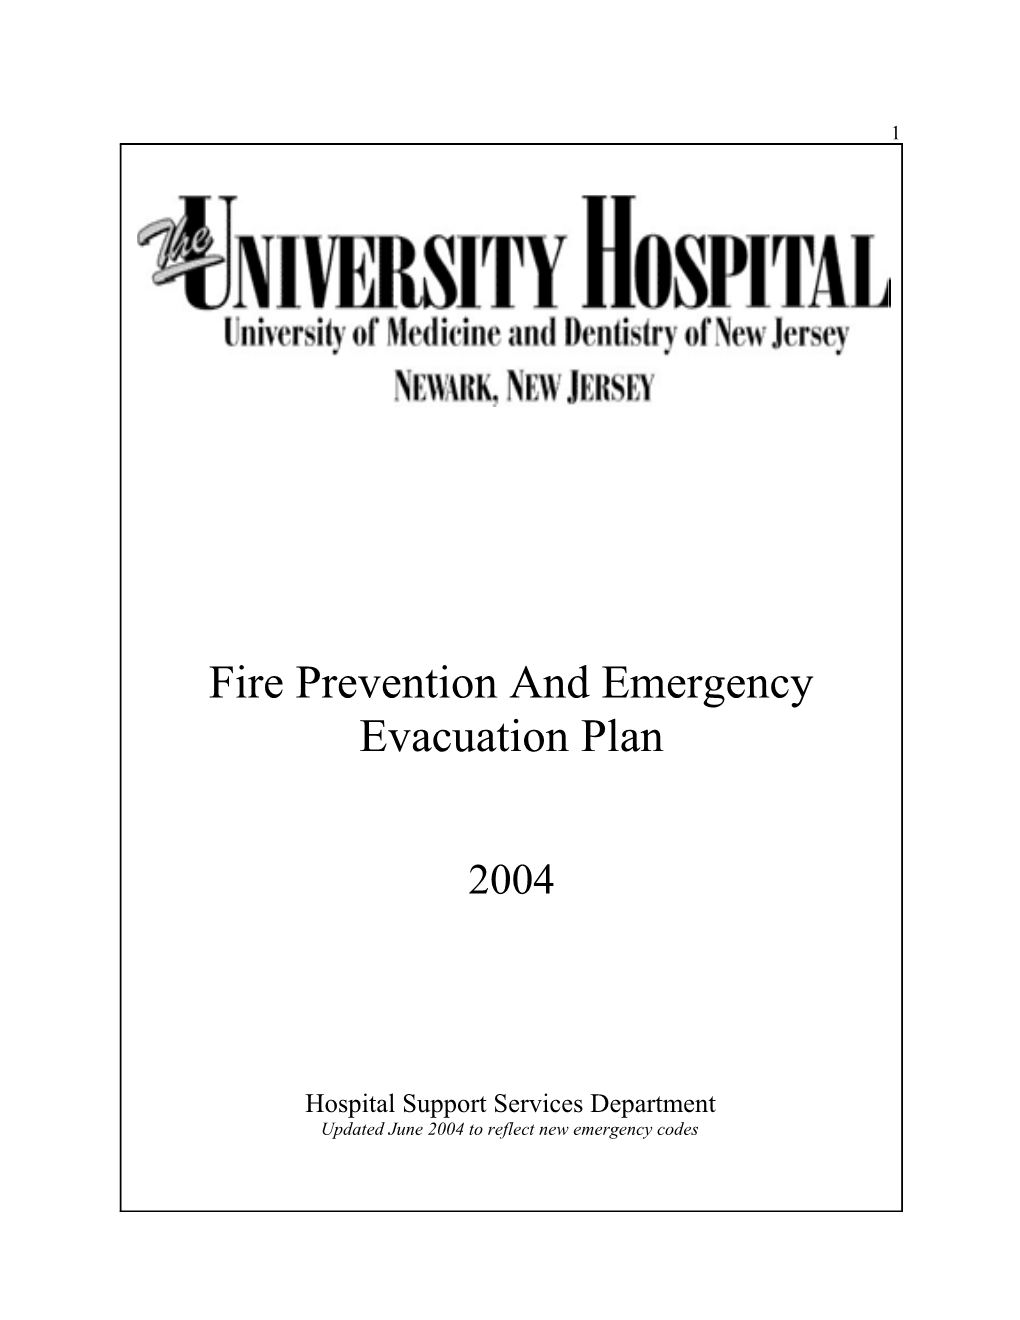 Fire Prevention and Emergency Evacuation Plan